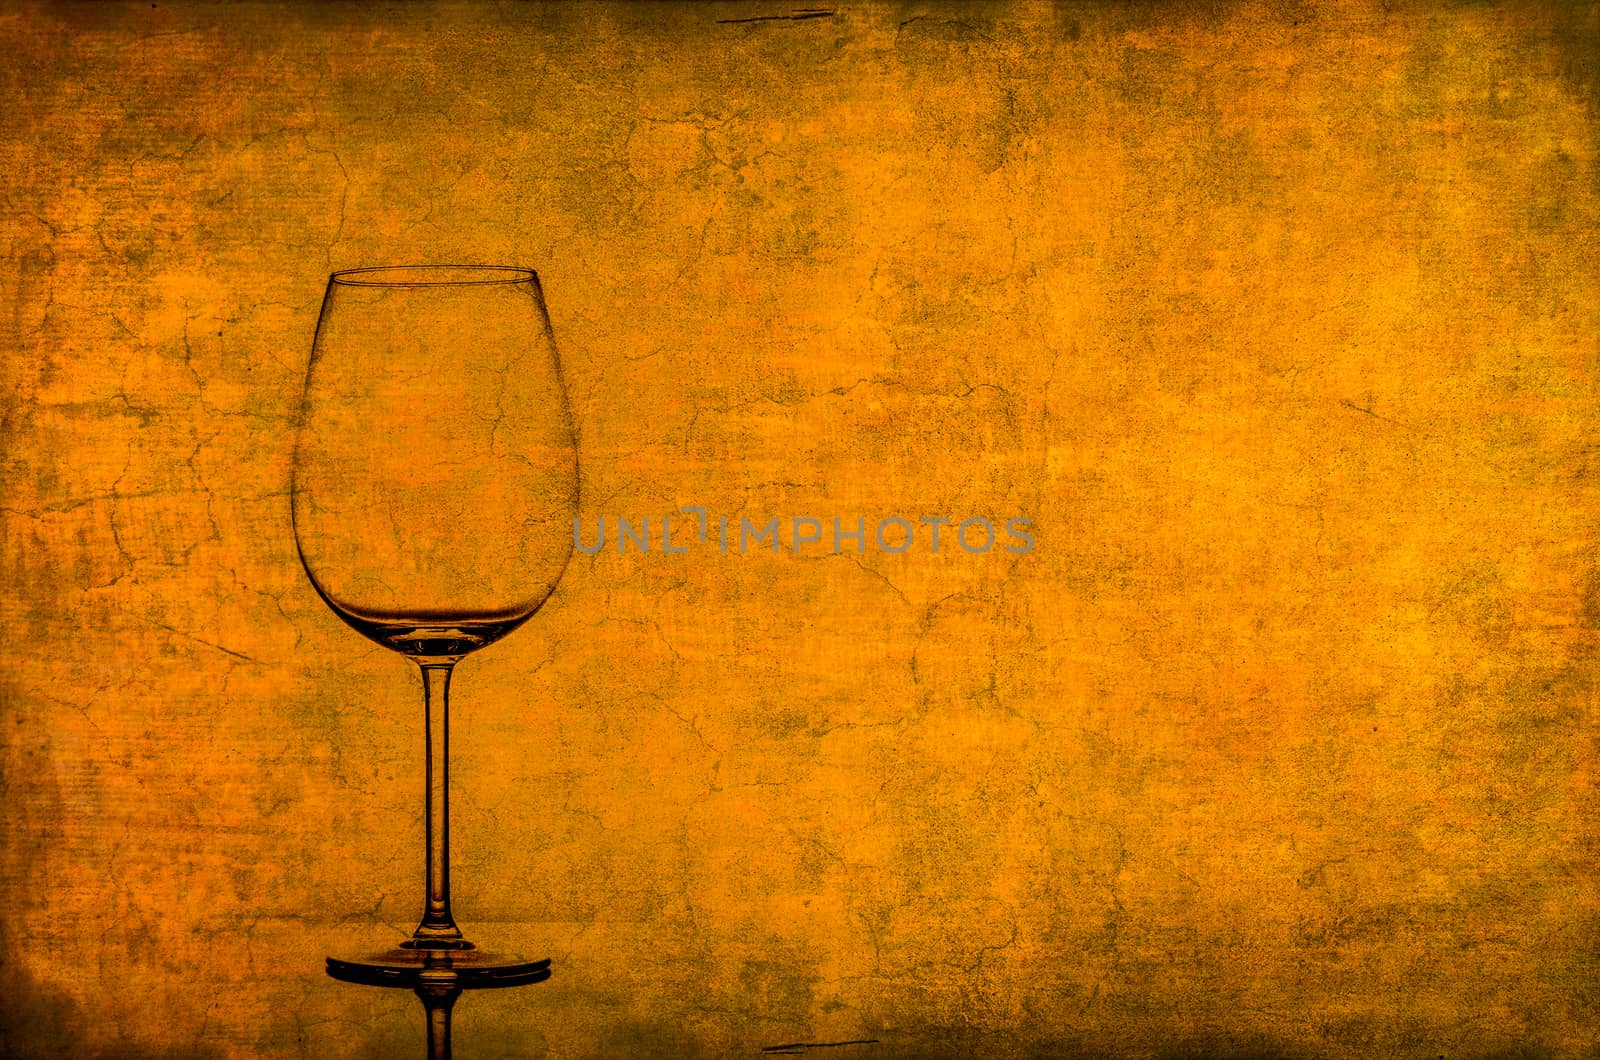 Empty wine glass on nice vintage texture by martinm303